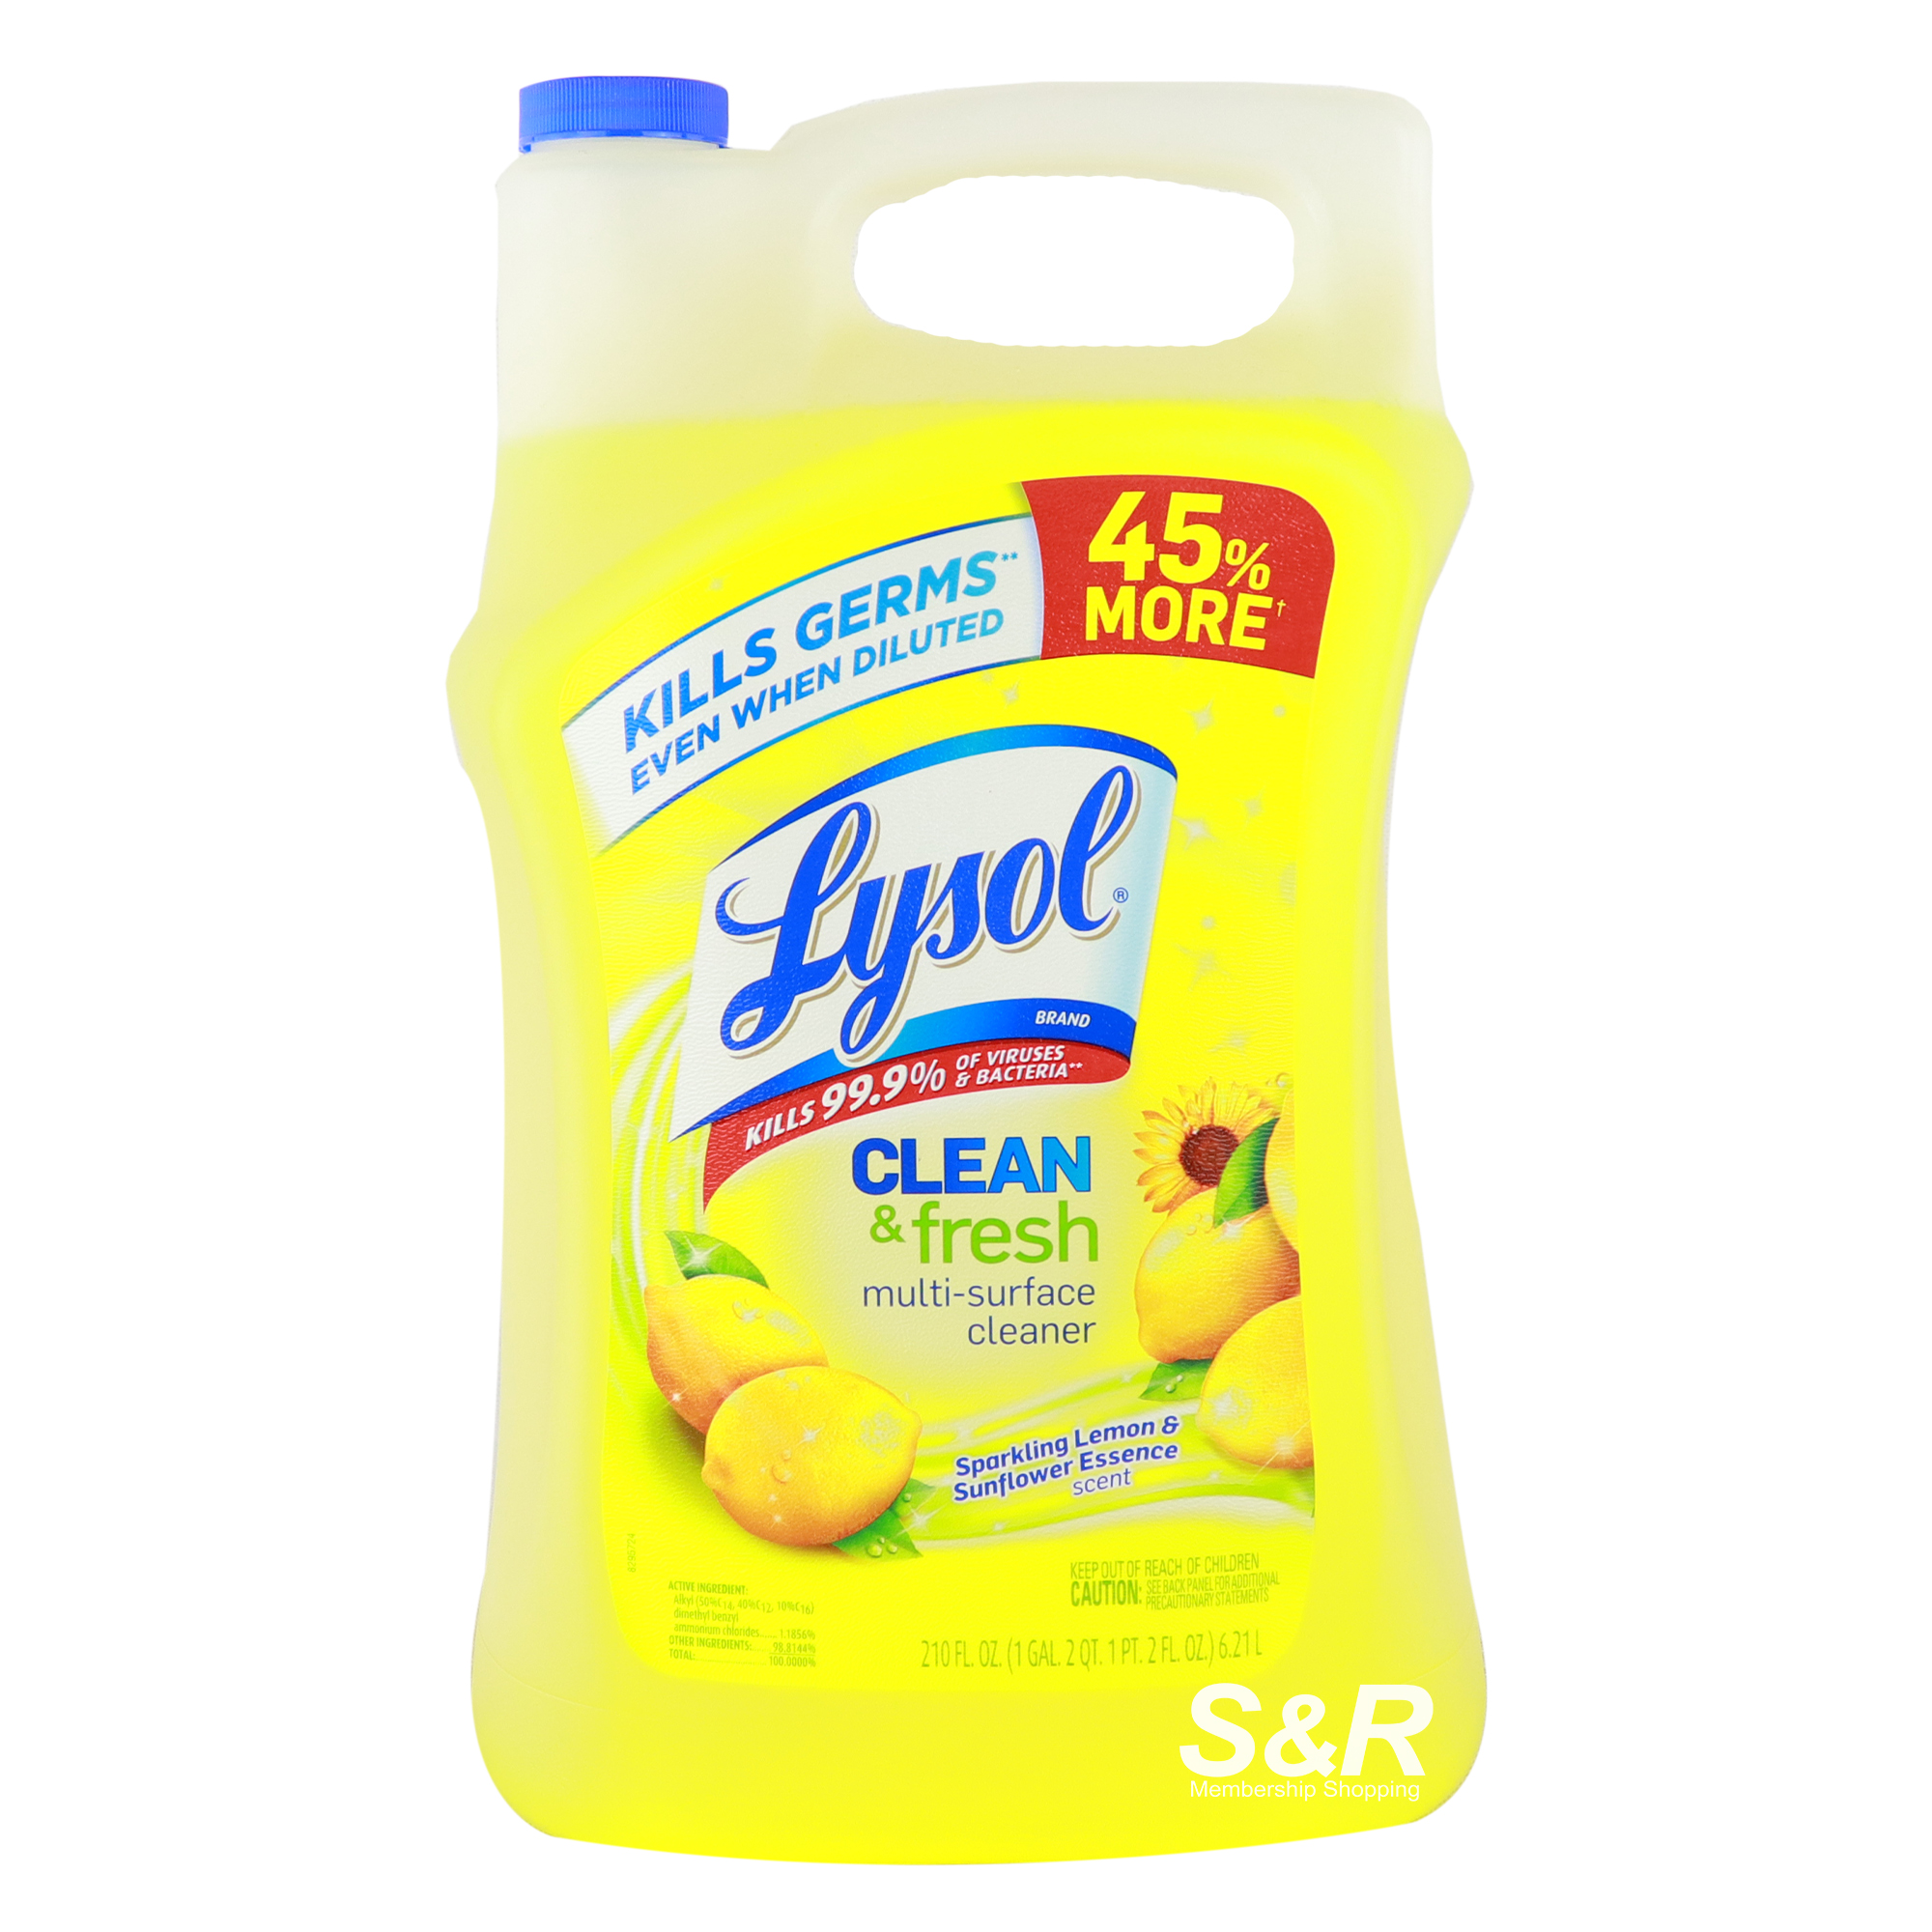 Lysol Clean and Fresh Multi-Surface Sparkling Lemon and Sunflower Essence 6.21L